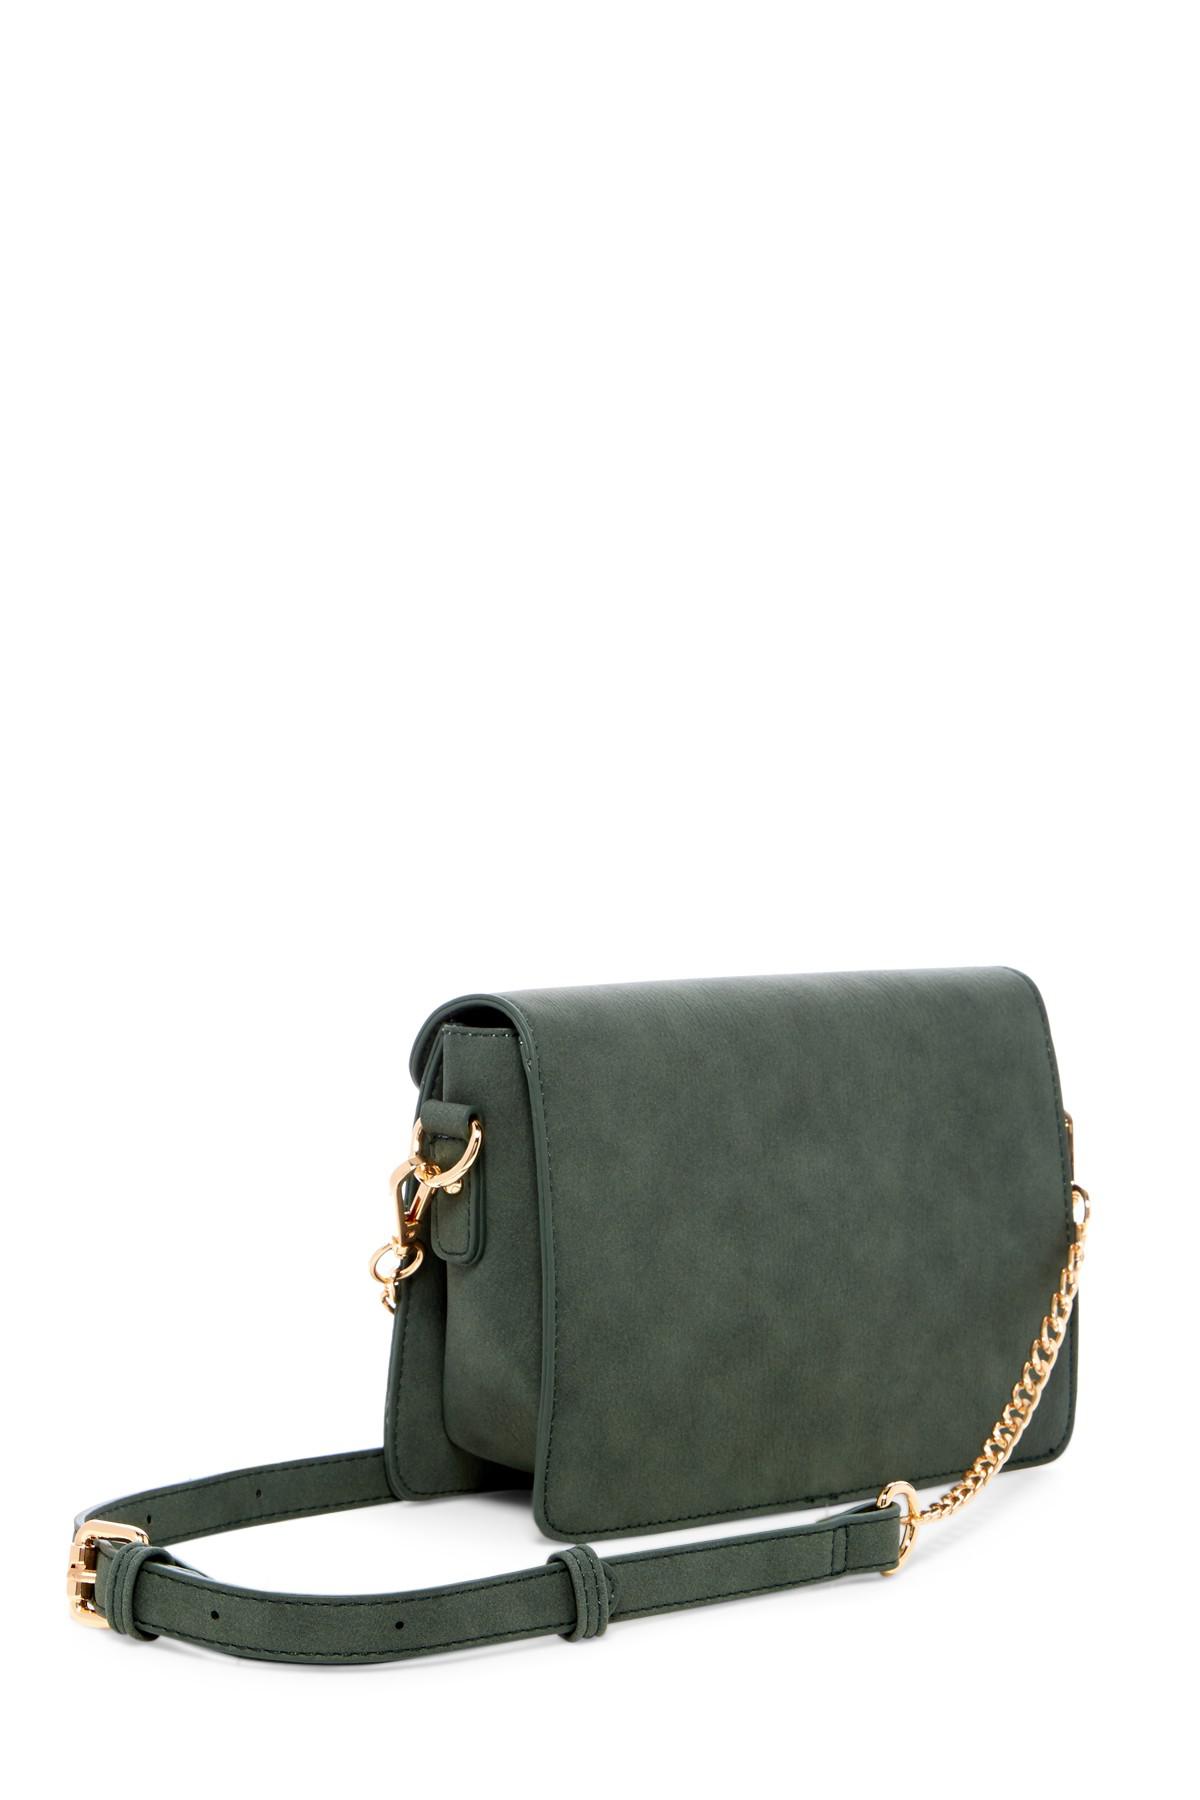 Urban Expressions Arabella Embroidered Vegan Leather Clutch in Green | Lyst